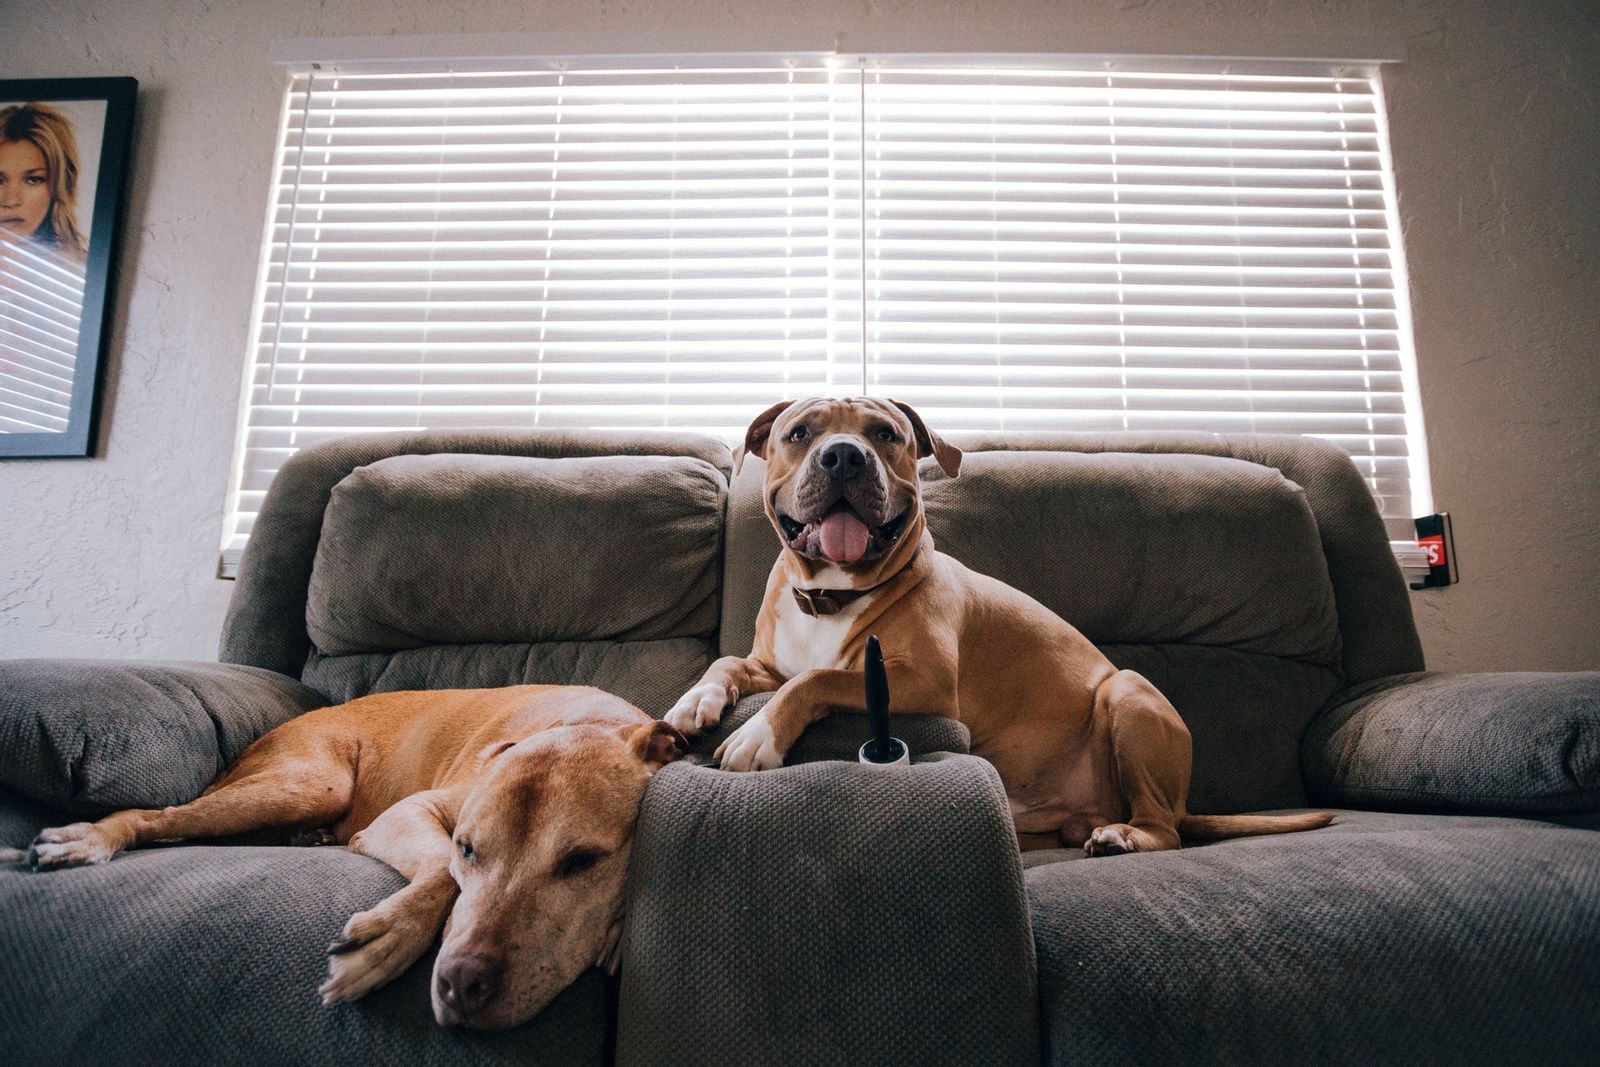 Top tips for creating a more pet-friendly home